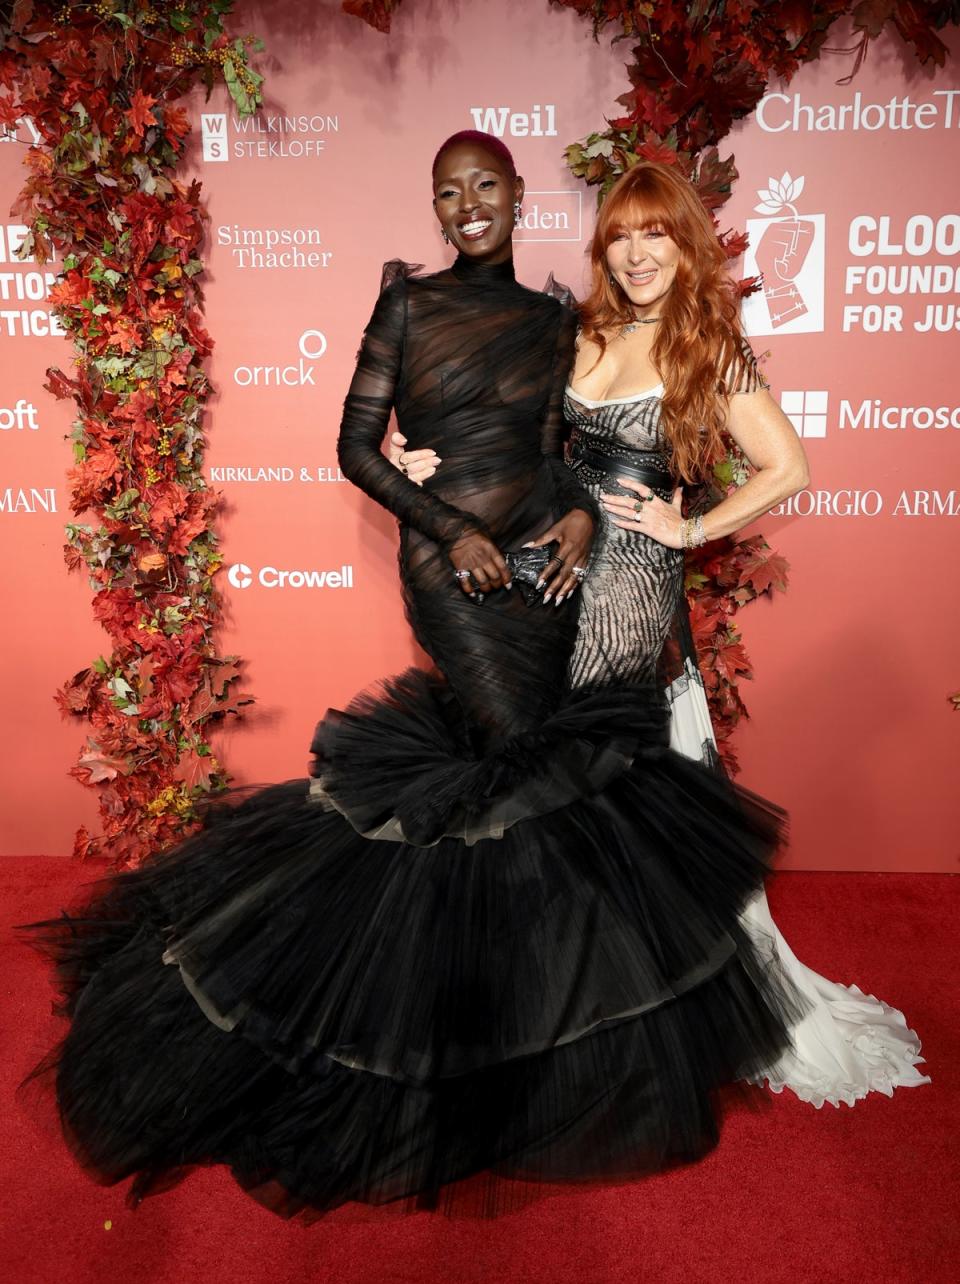 L-R, Jodie Turner-Smith and Charlotte Tilbury attend the Clooney Foundation For Justice Inaugural Albie Awards at New York Public Library (Dimitrios Kambouris/Getty Images for Albie Awards)